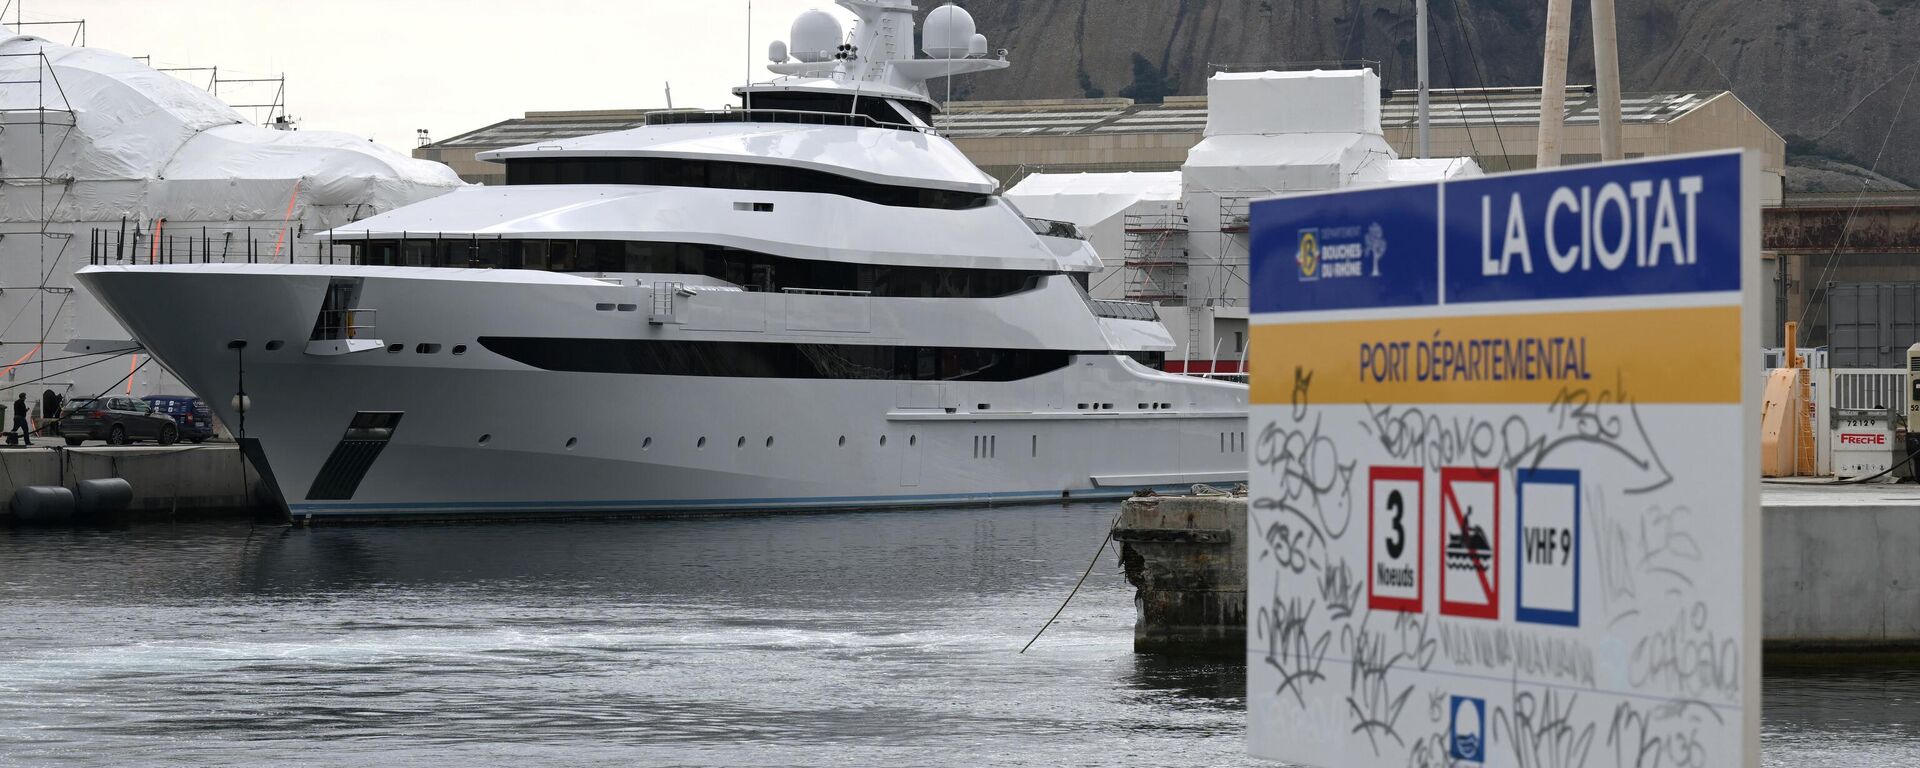 A picture taken on March 3, 2022 in a shipyard of La Ciotat, near Marseille, southern France, shows a yacht, Amore Vero, owned by a company linked to Igor Sechin, chief executive of Russian energy giant Rosneft - Sputnik International, 1920, 03.03.2022